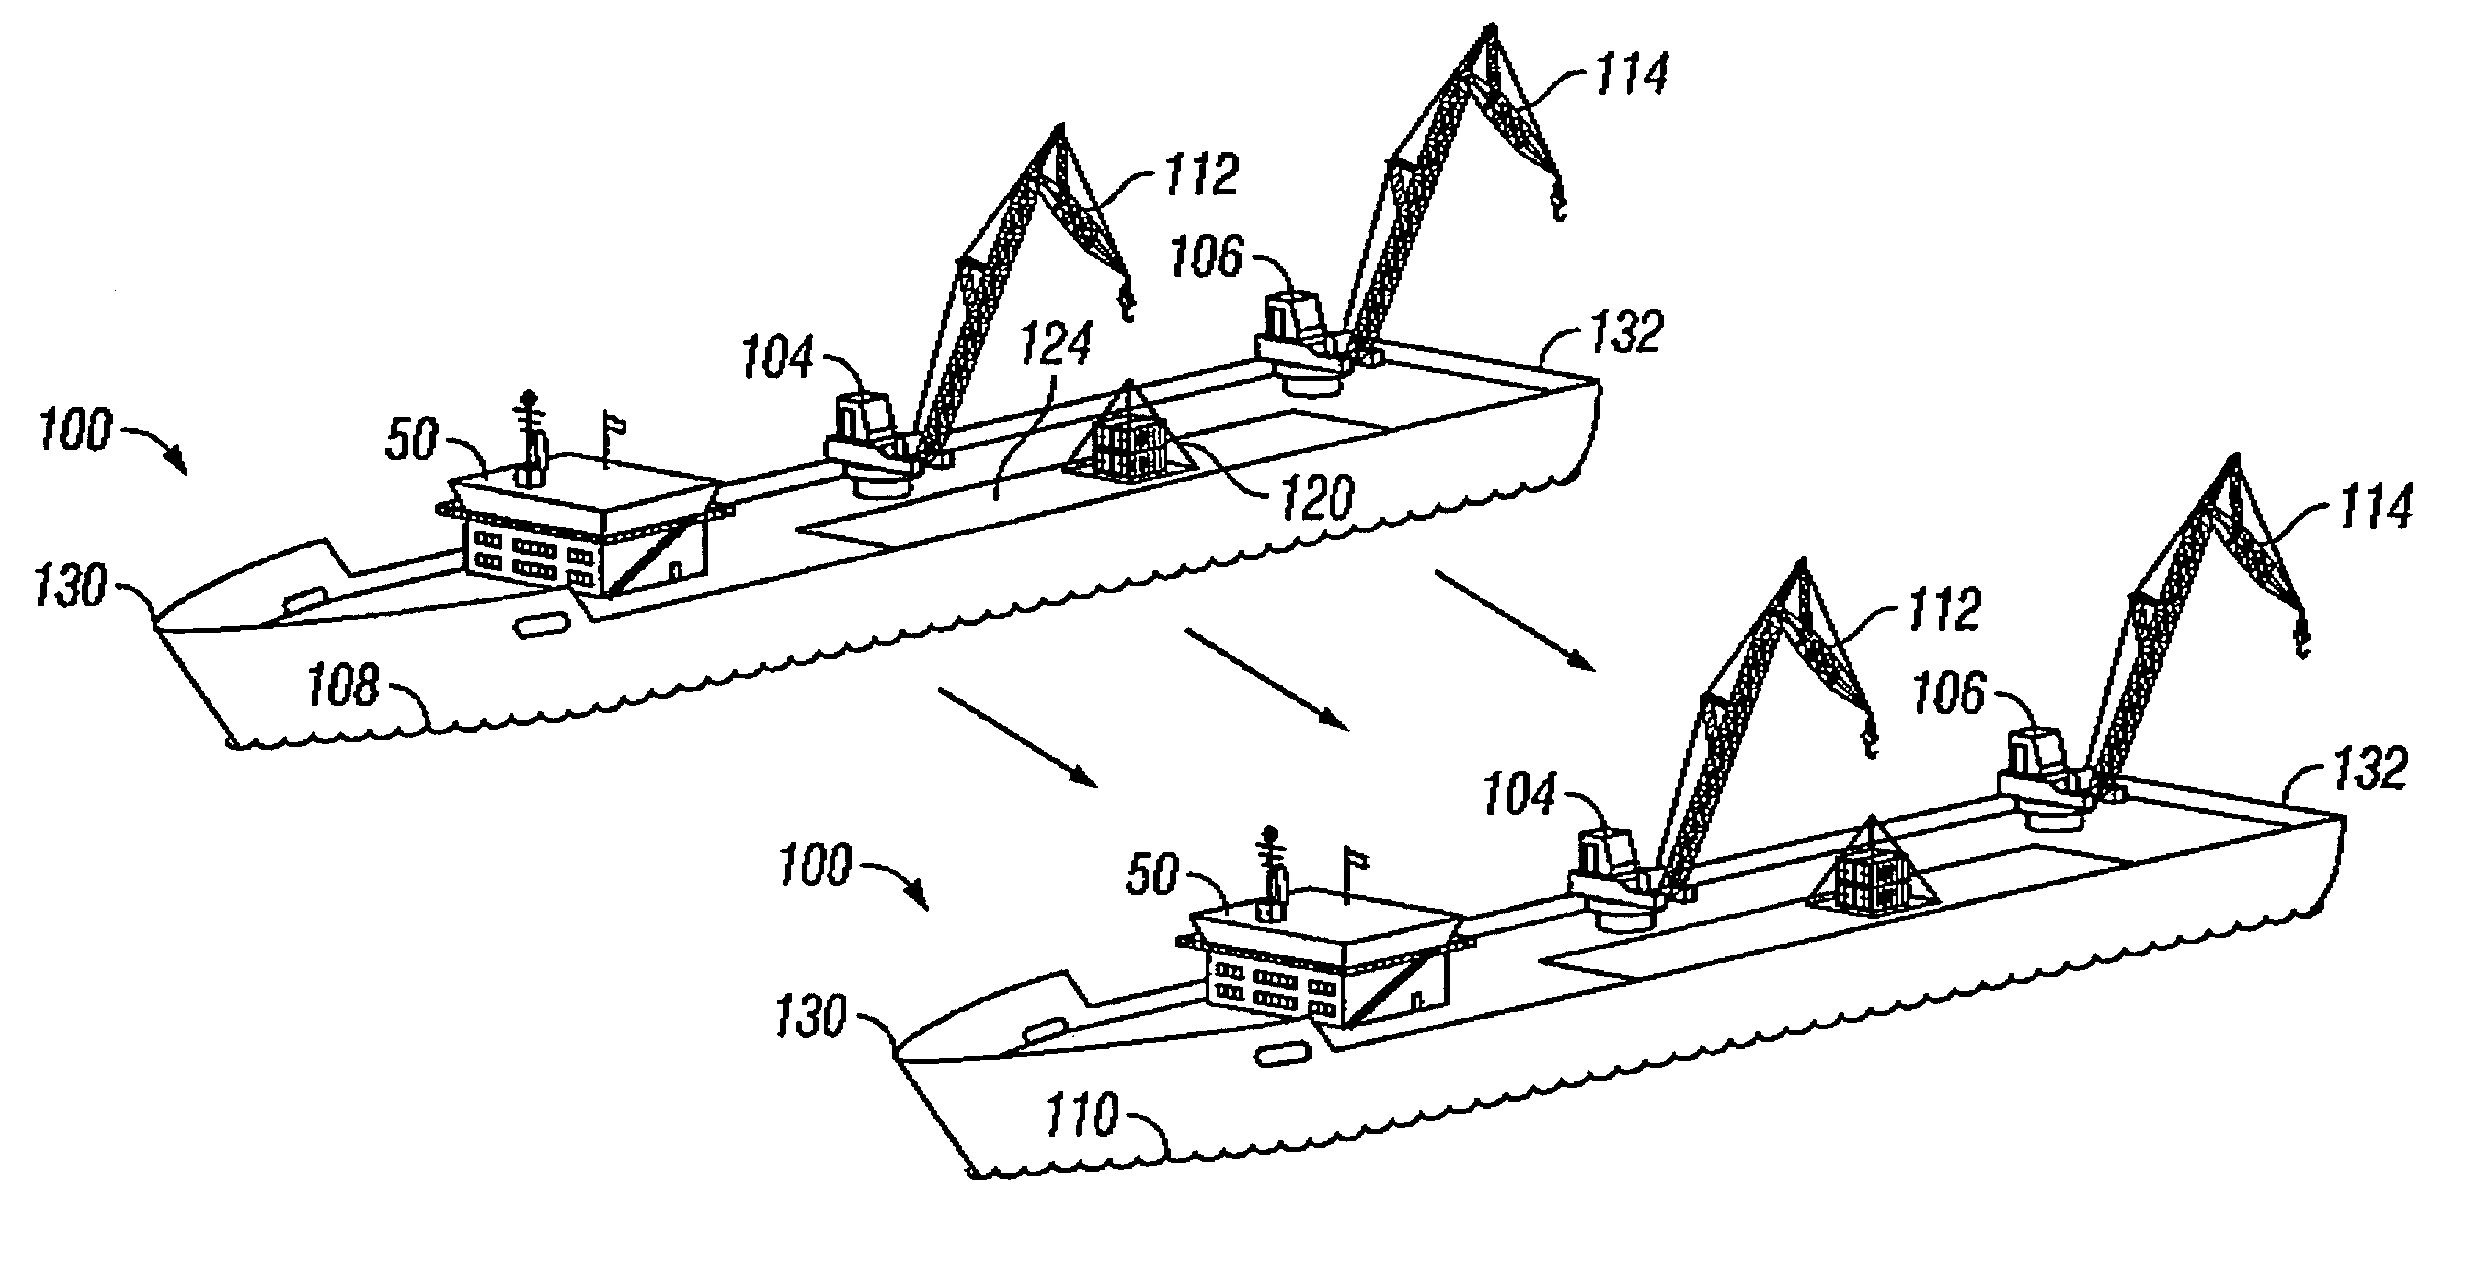 Method for lifting and transporting a heavy load using a fly-jib